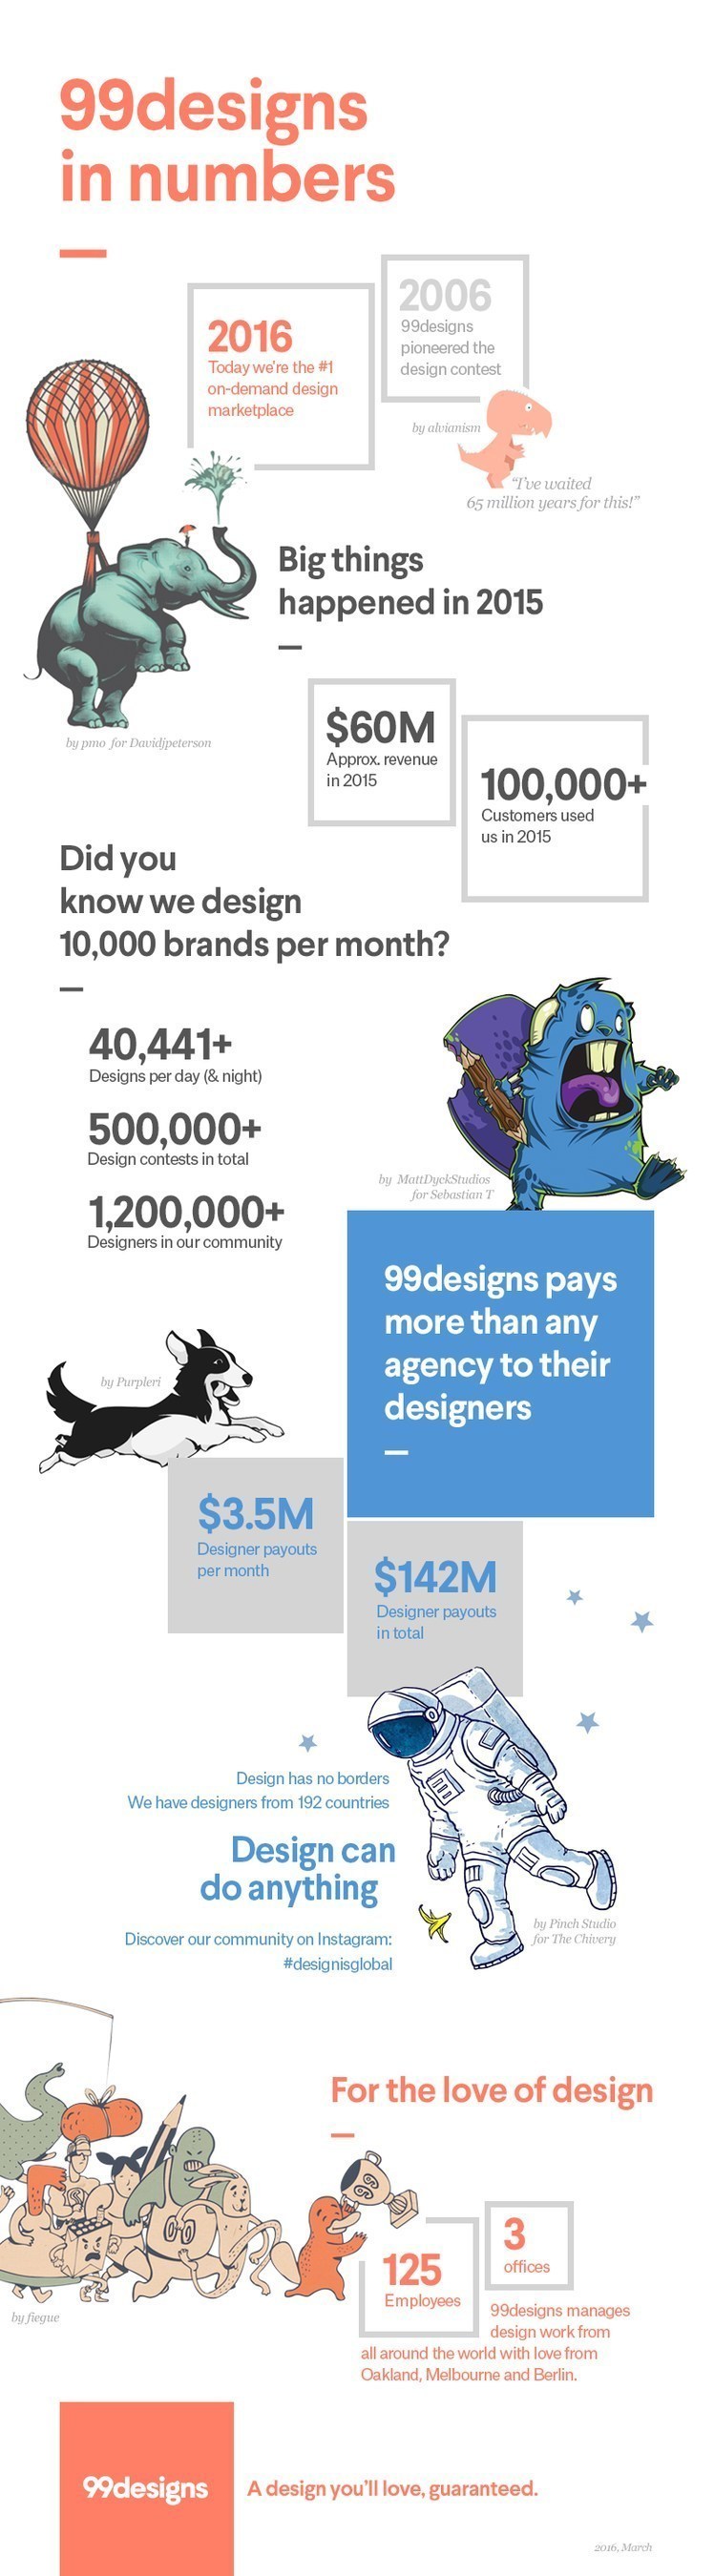 99designs in numbers infographic